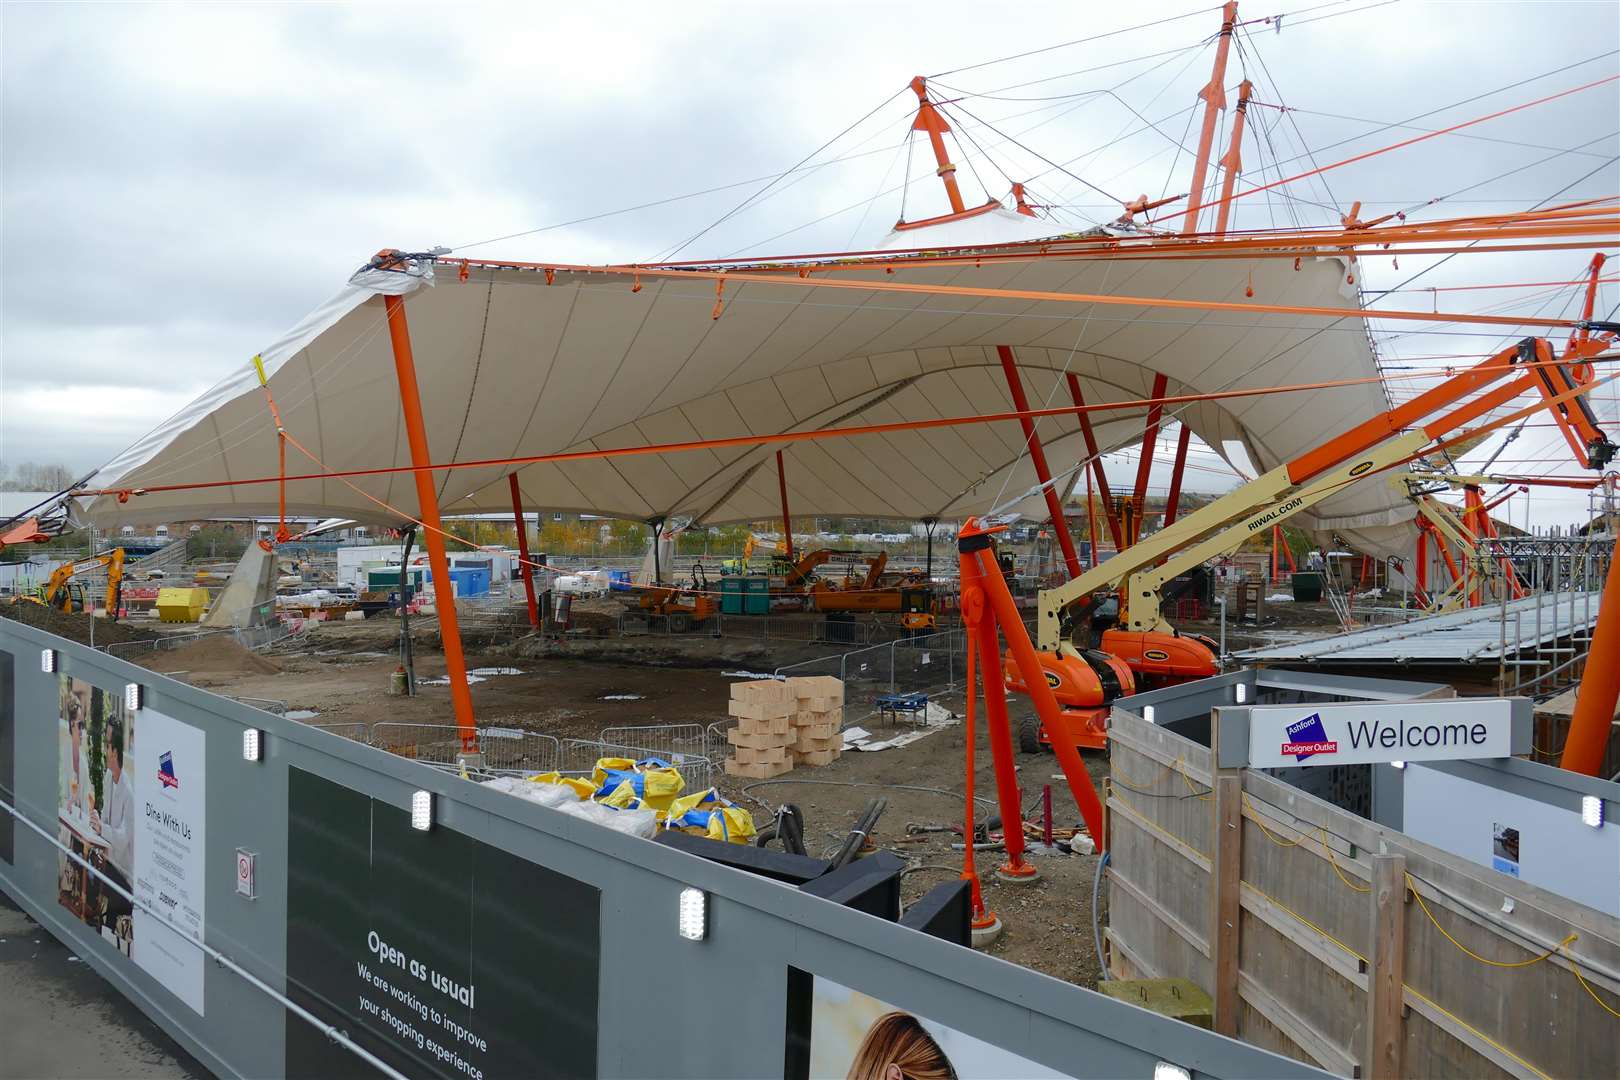 The Designer Outlet food court has been ripped out as part of the works. Picture: Andy Clark